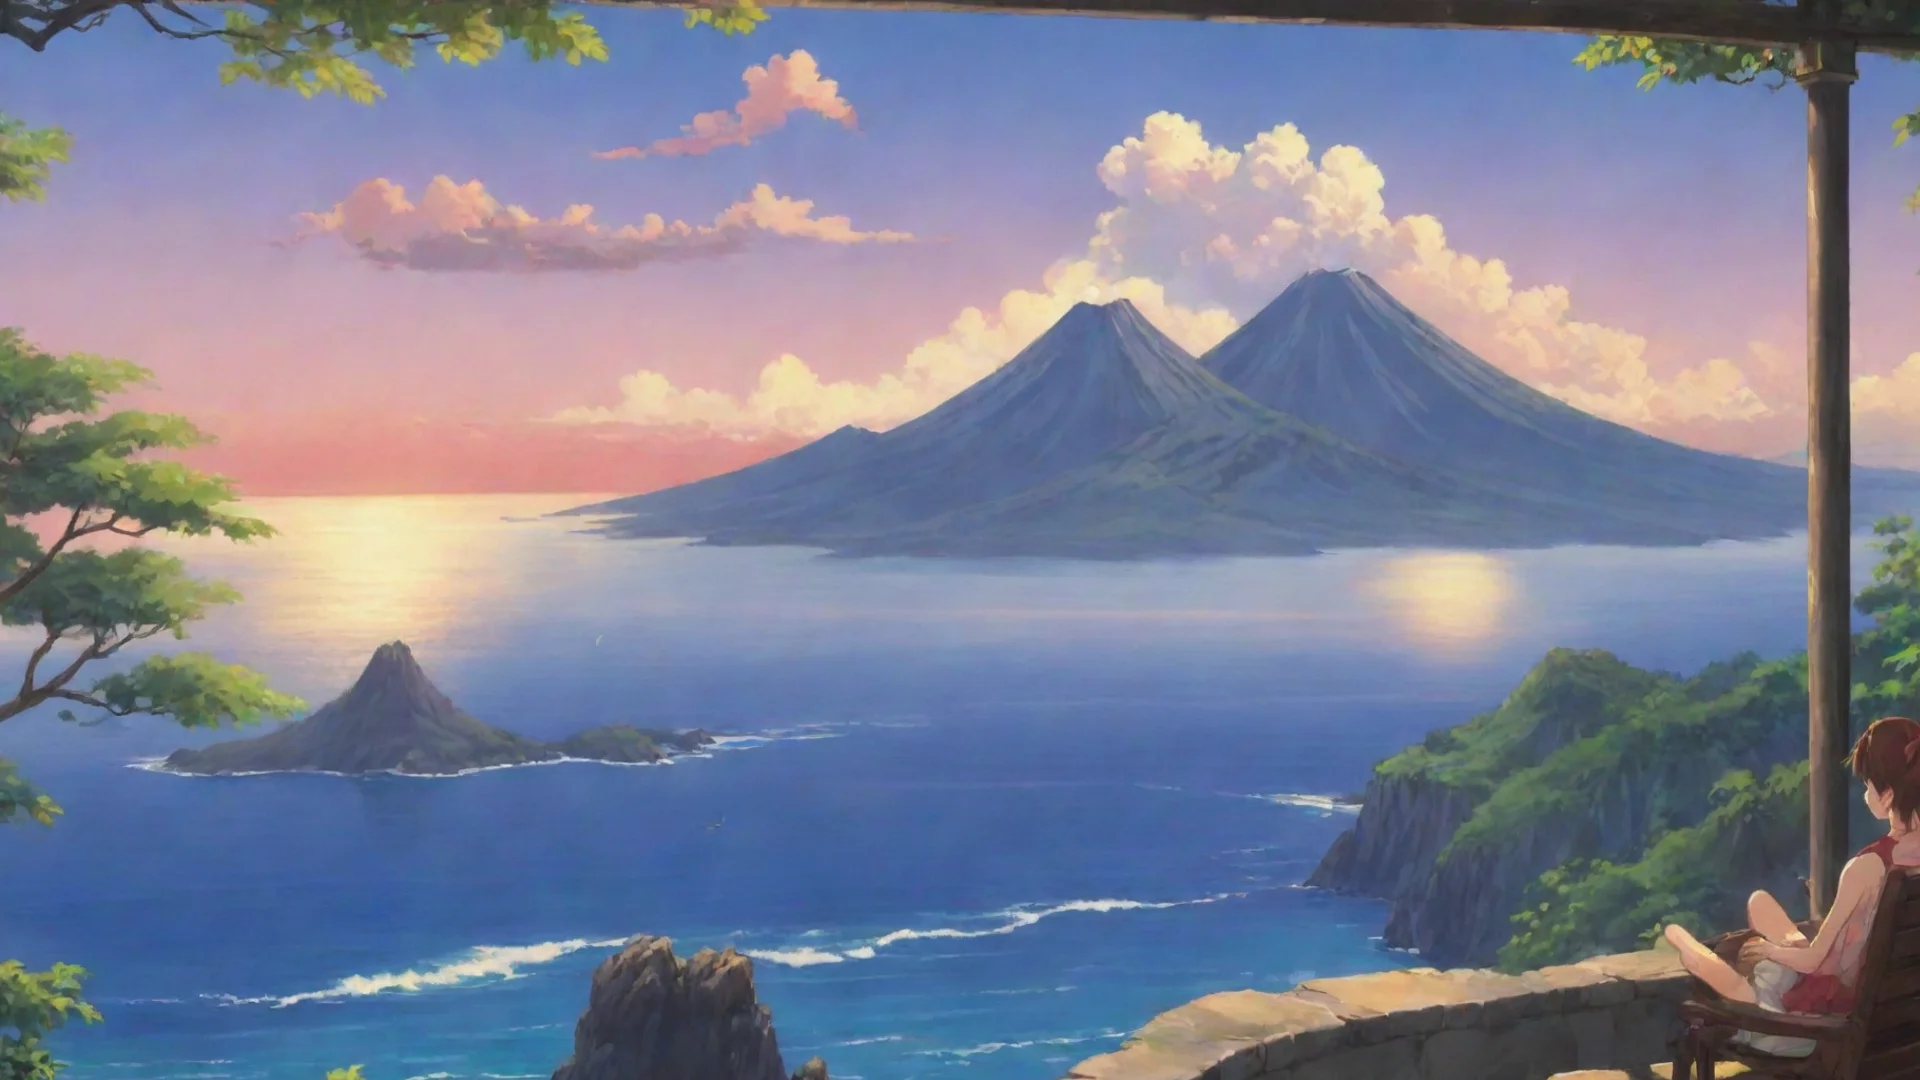 aiamazing relaxing anime scene serene lookout over ocean with volcano lovely awesome portrait 2 wide